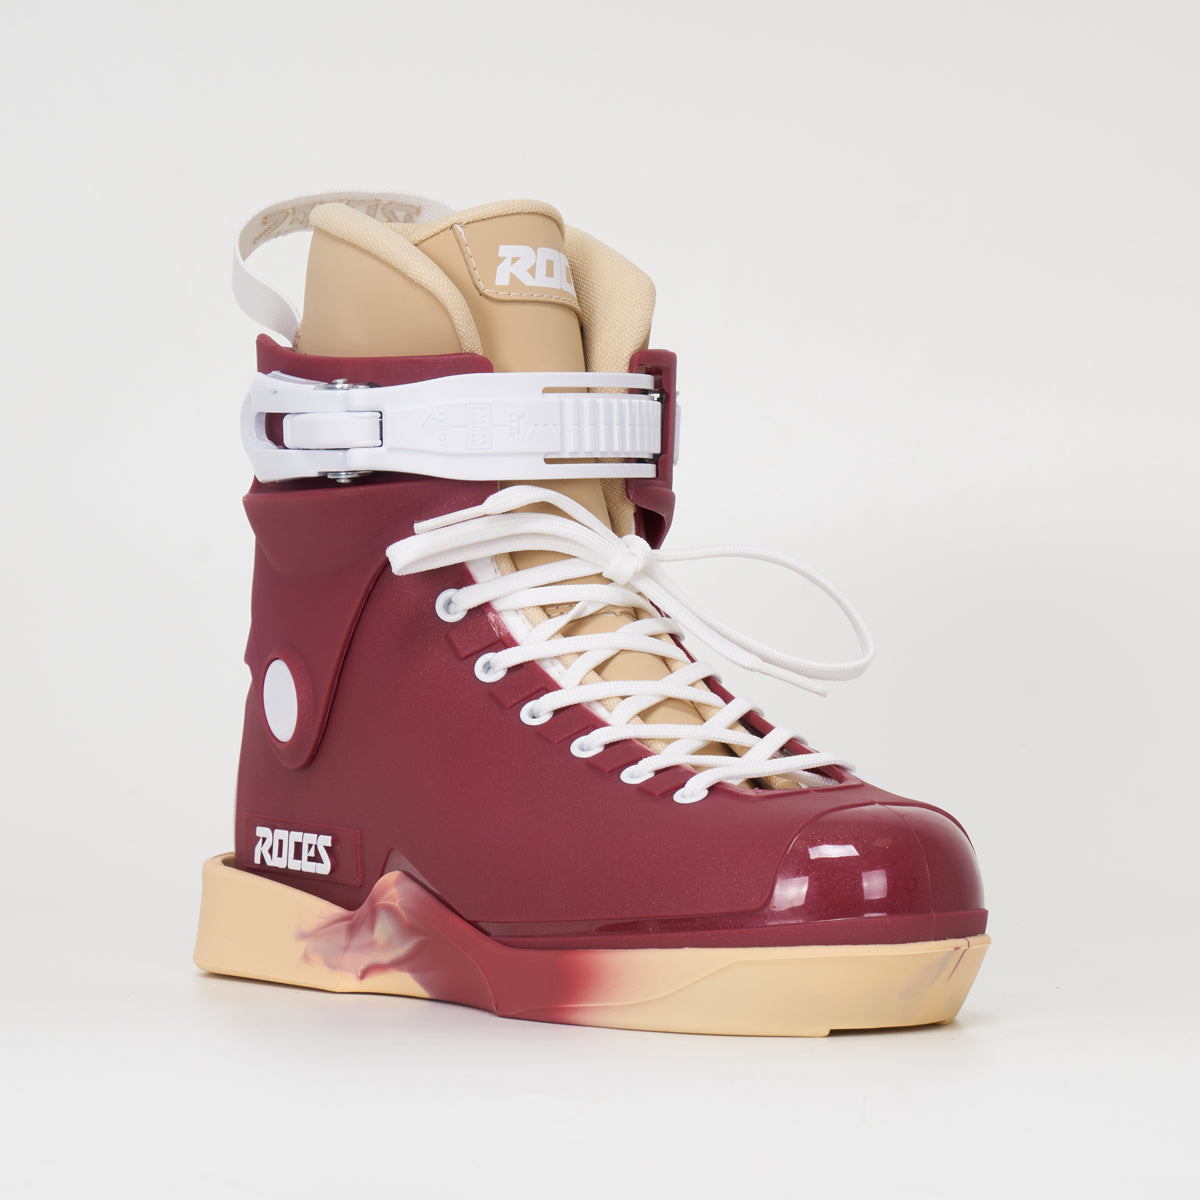 Roces M12 LO UFS Boot Only Skates - Pomegranate